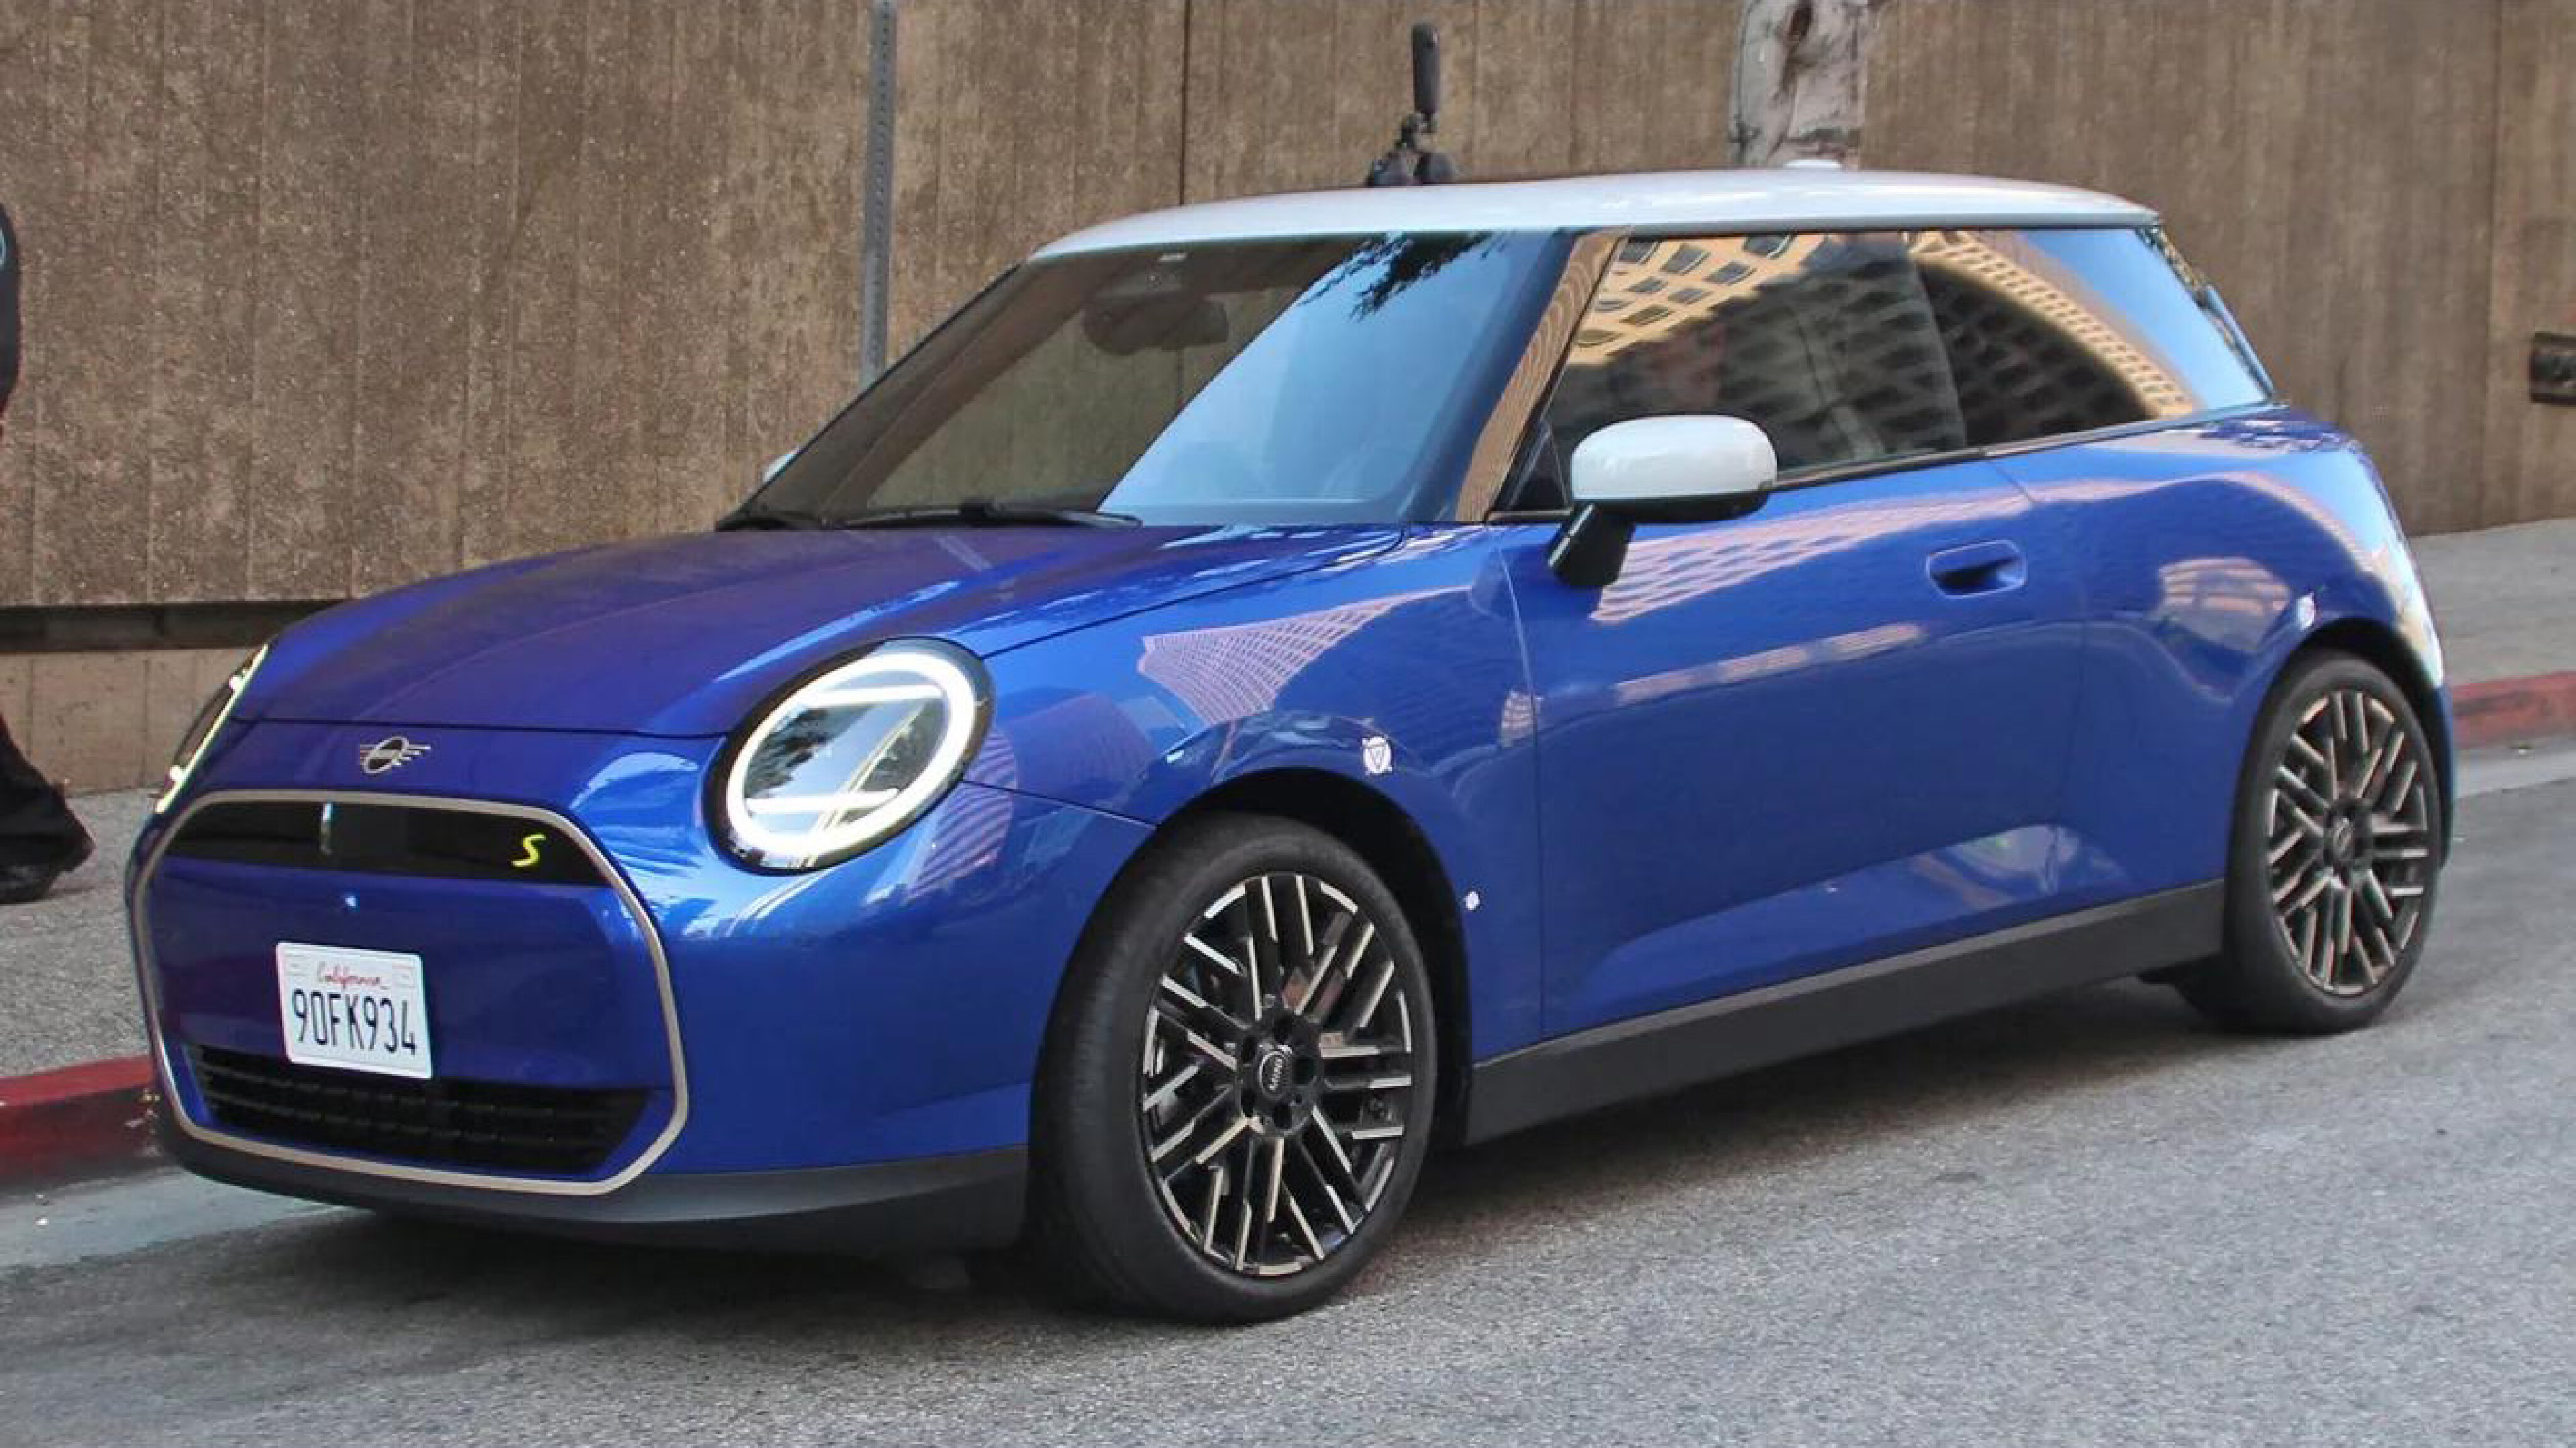 2023 Mini Cooper EV revealed without disguise during filming